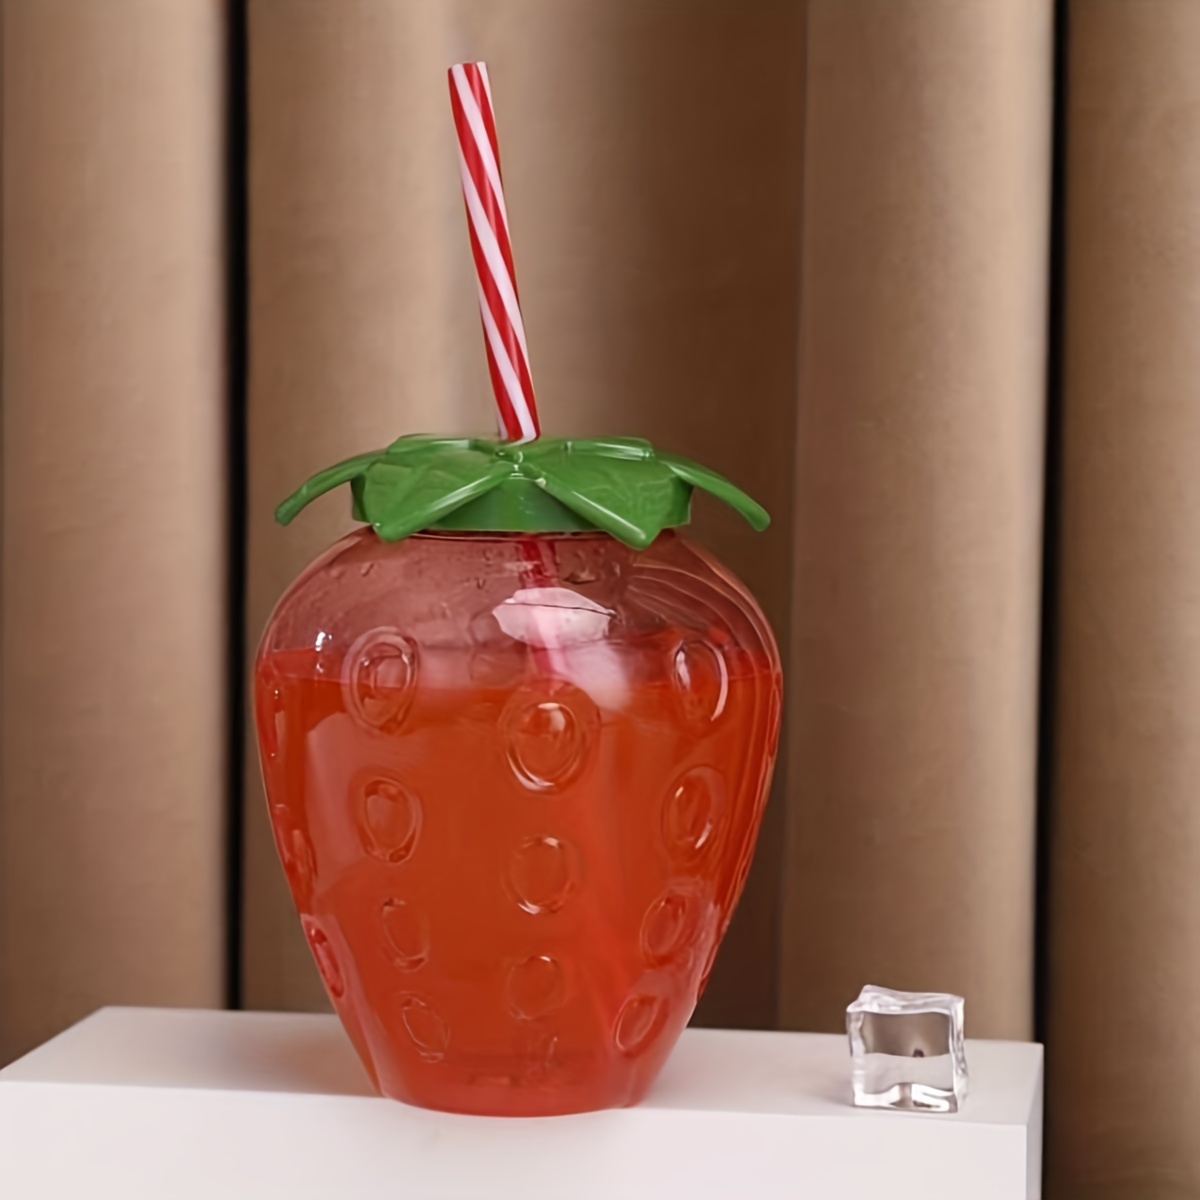 Strawberries and Pineapple Straw Toppers set of 3 for Tumbler